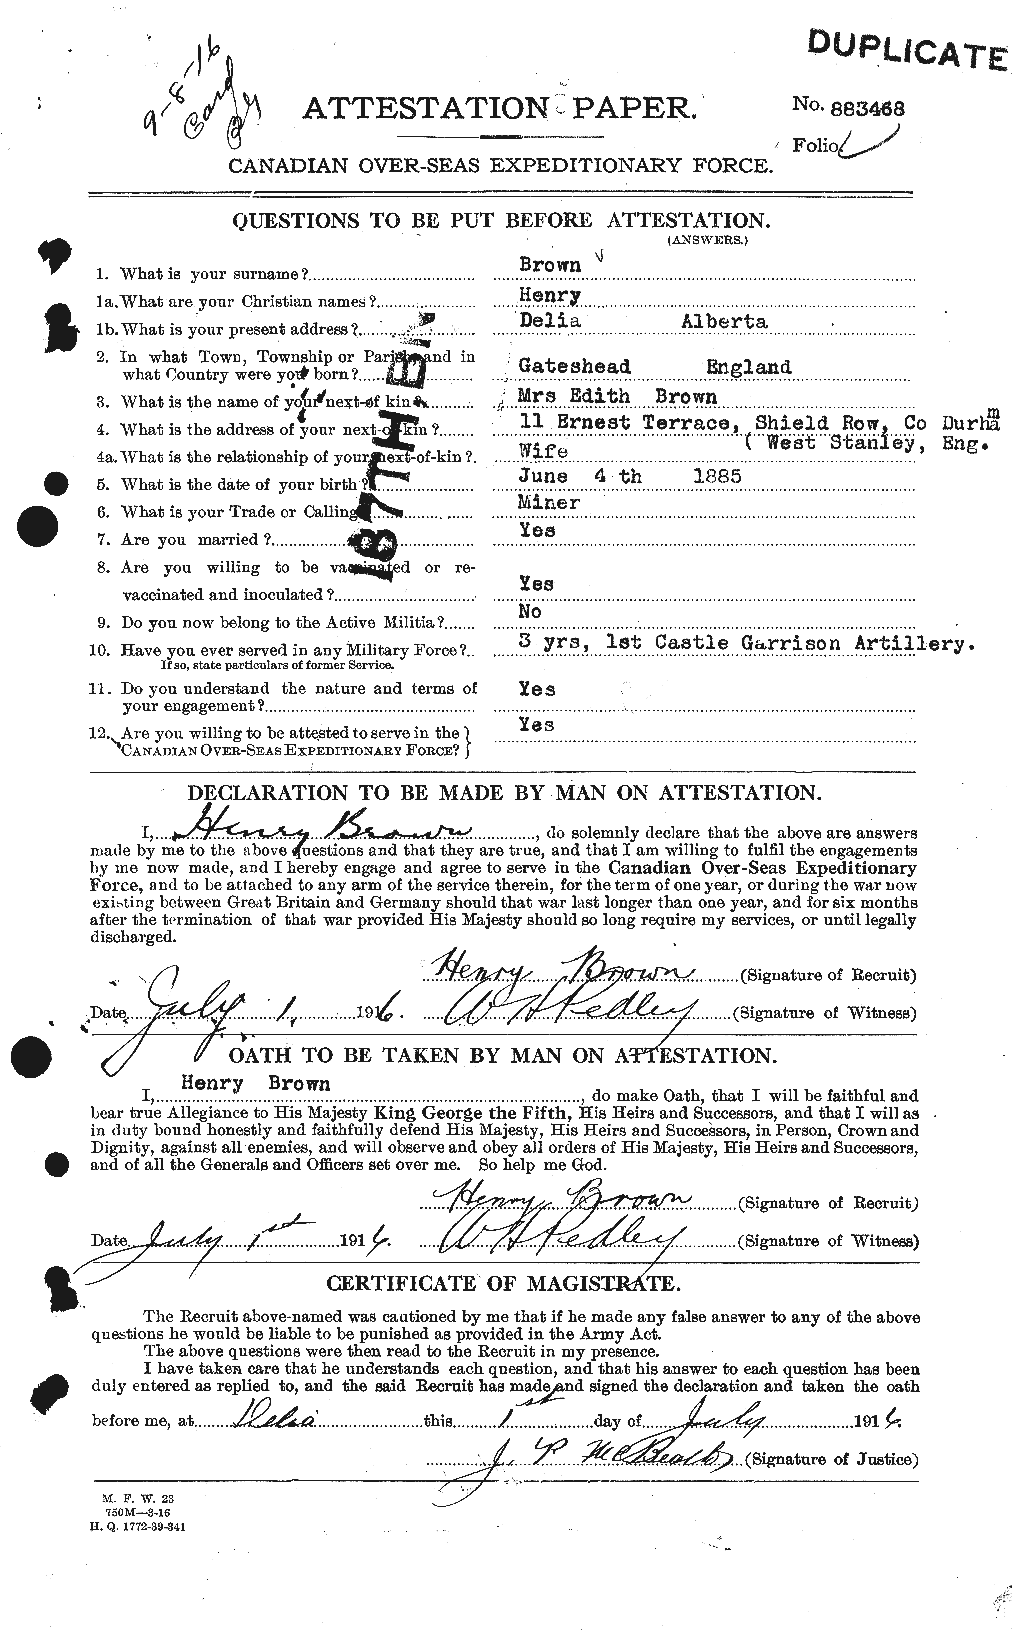 Personnel Records of the First World War - CEF 265510a